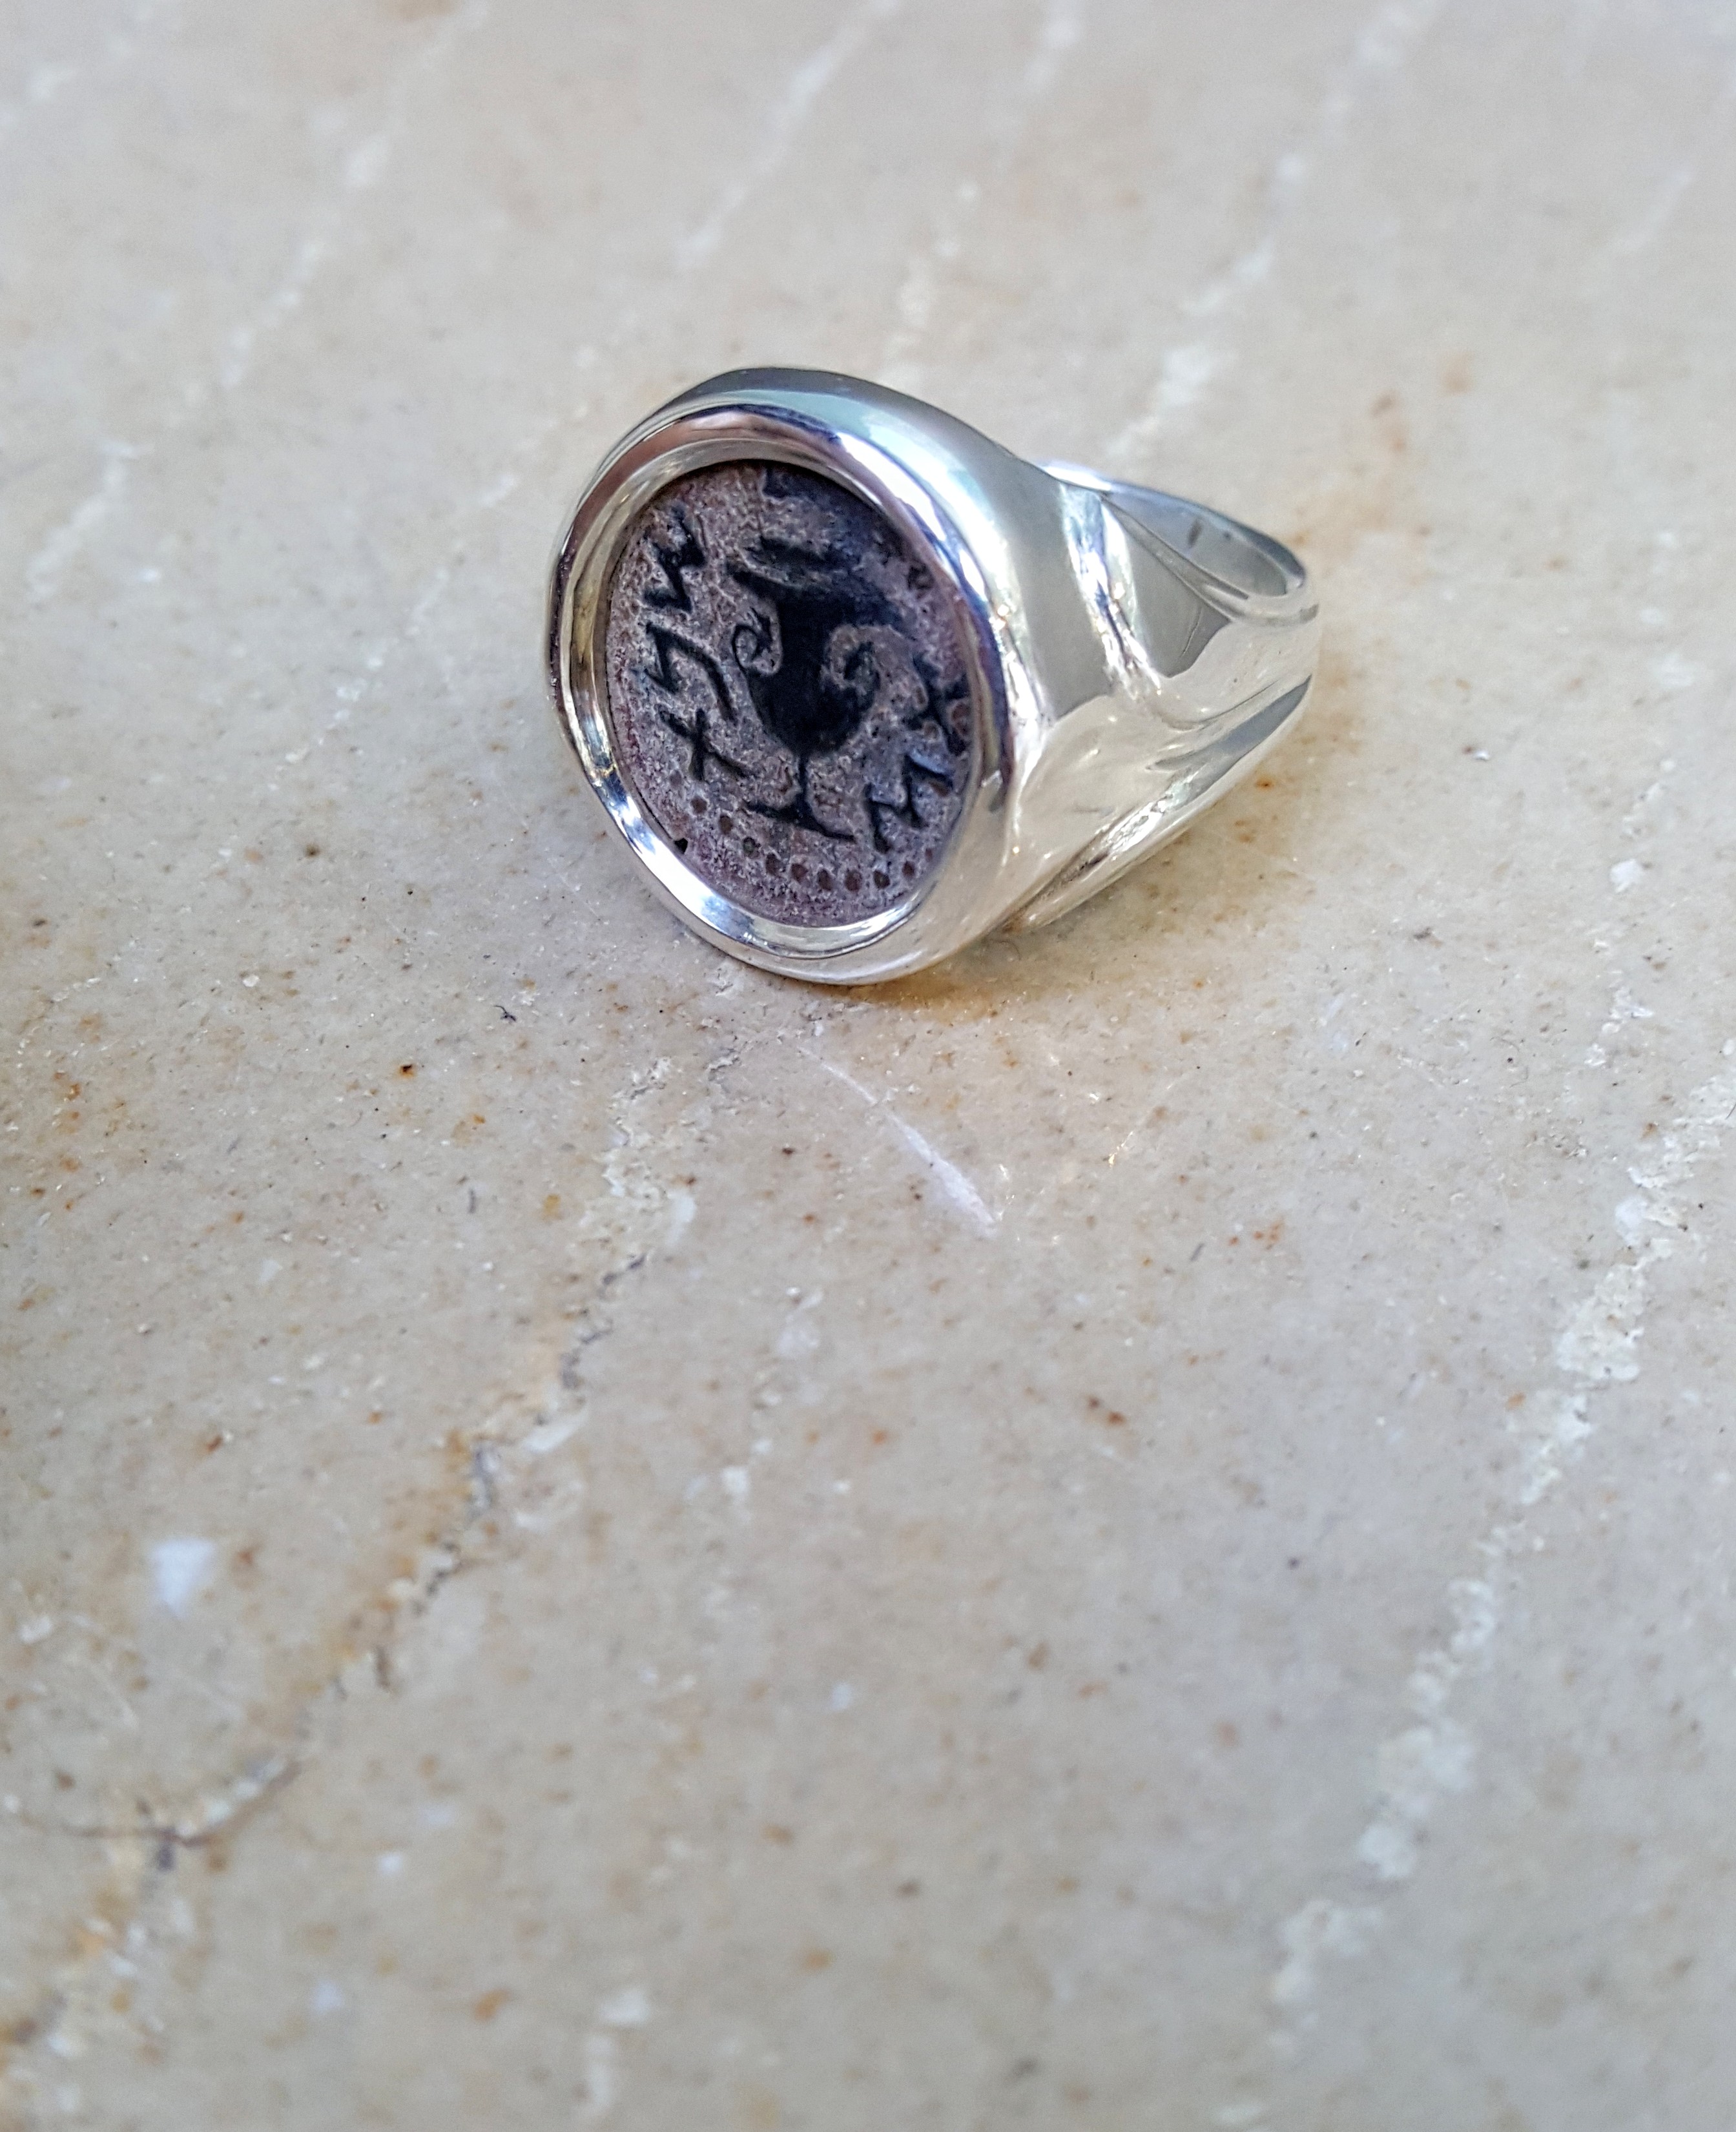 Details about  / *Limited Time Offer* Special Coin Ring Handmade Bible Jewish Israeli Sizes 6-11